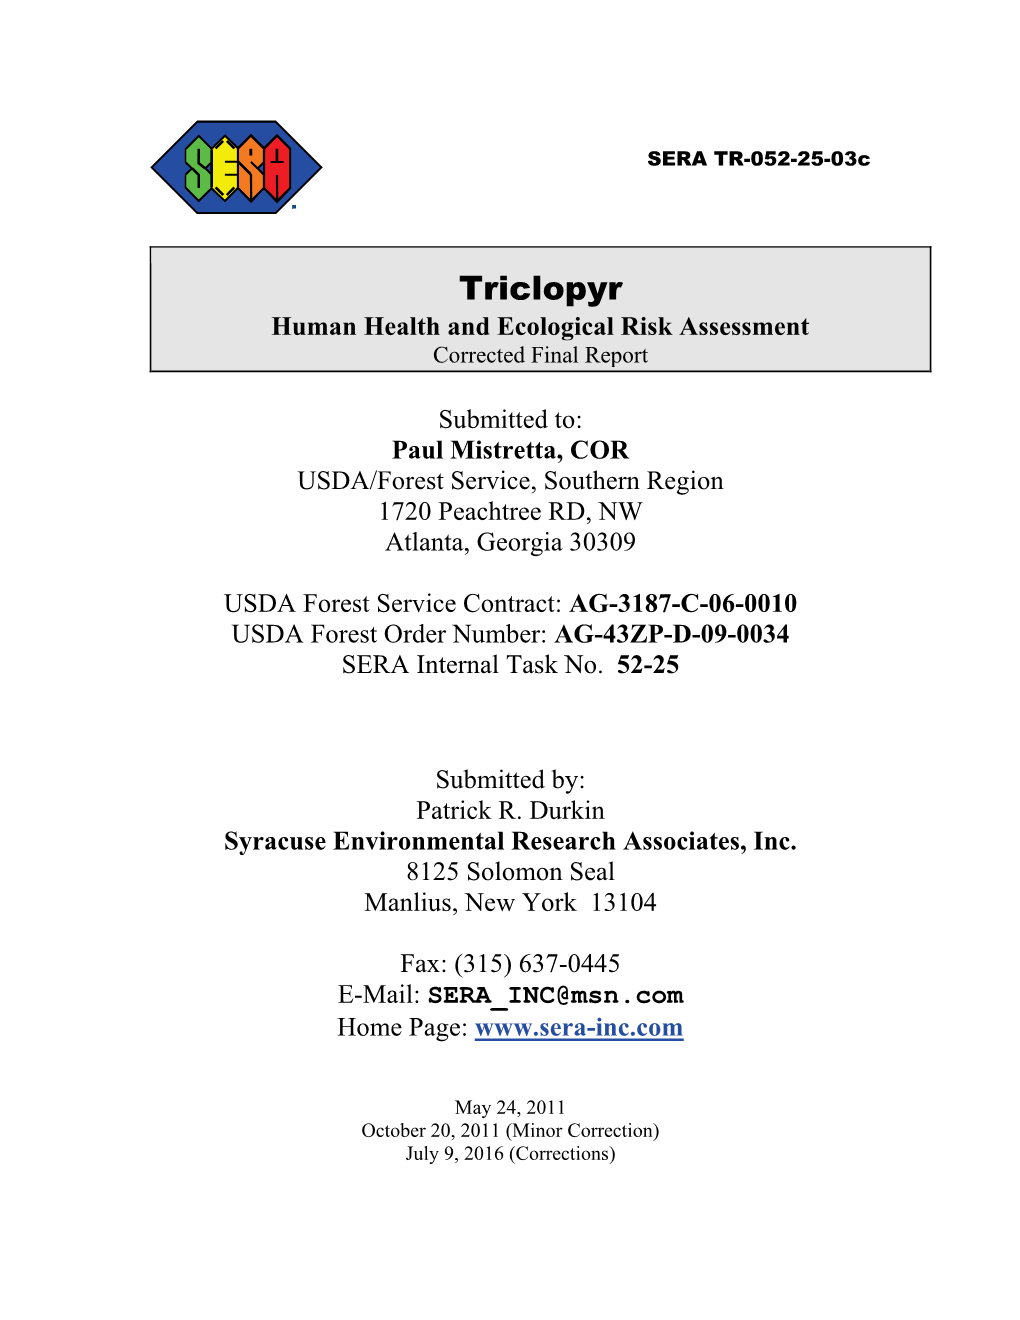 Triclopyr Human Health and Ecological Risk Assessment Corrected Final Report